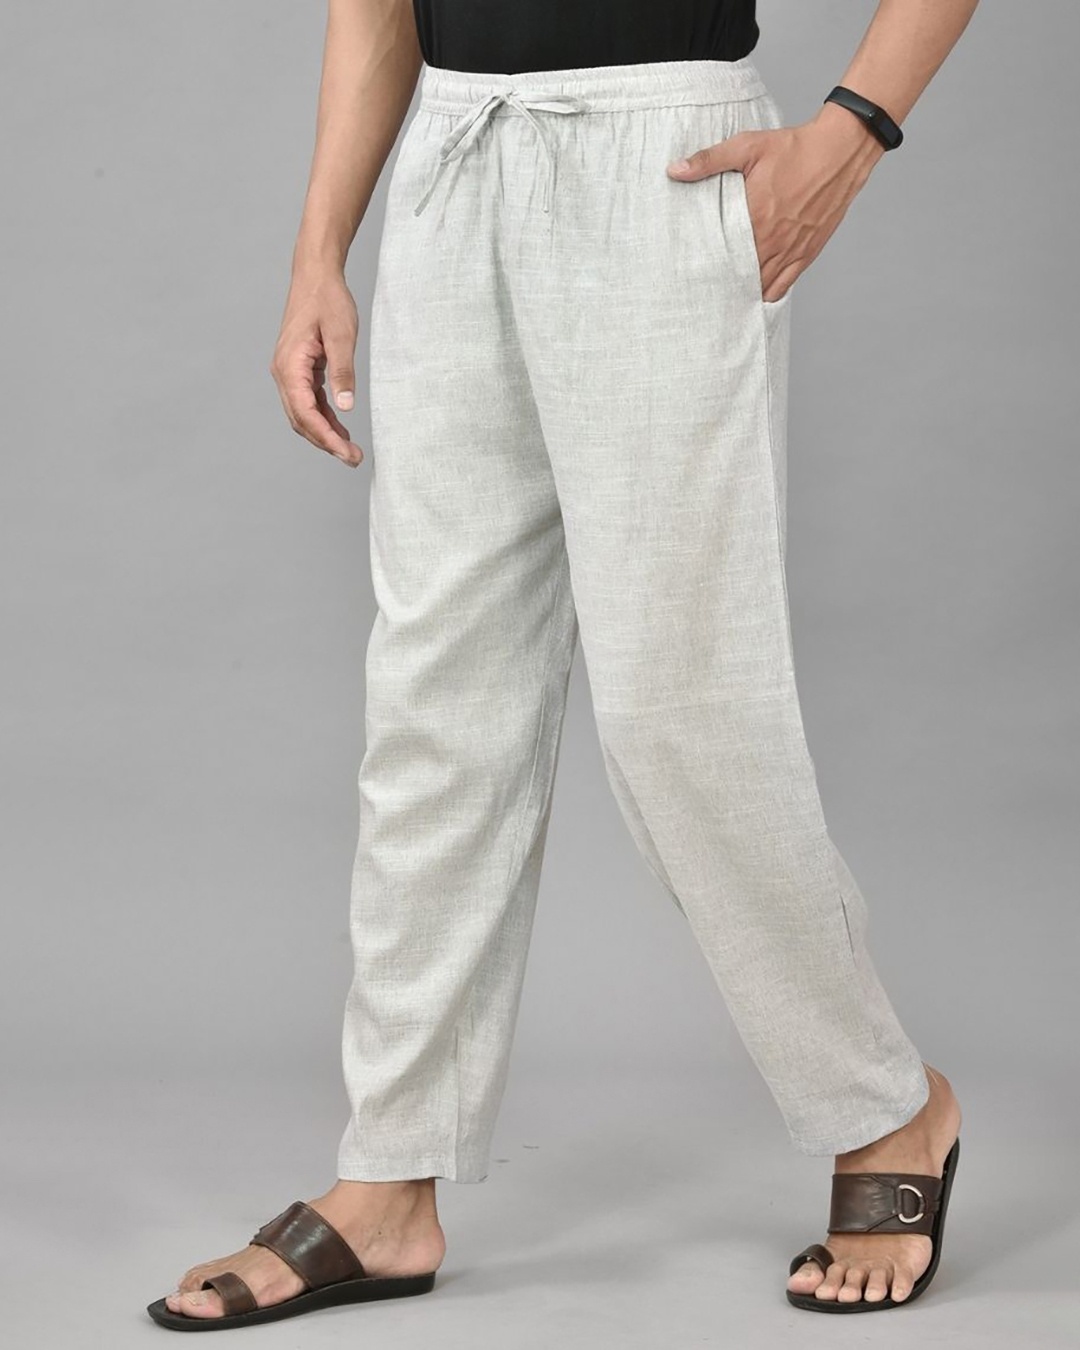 Buy Women White Regular Fit Solid Casual Trousers Online  759536  Allen  Solly